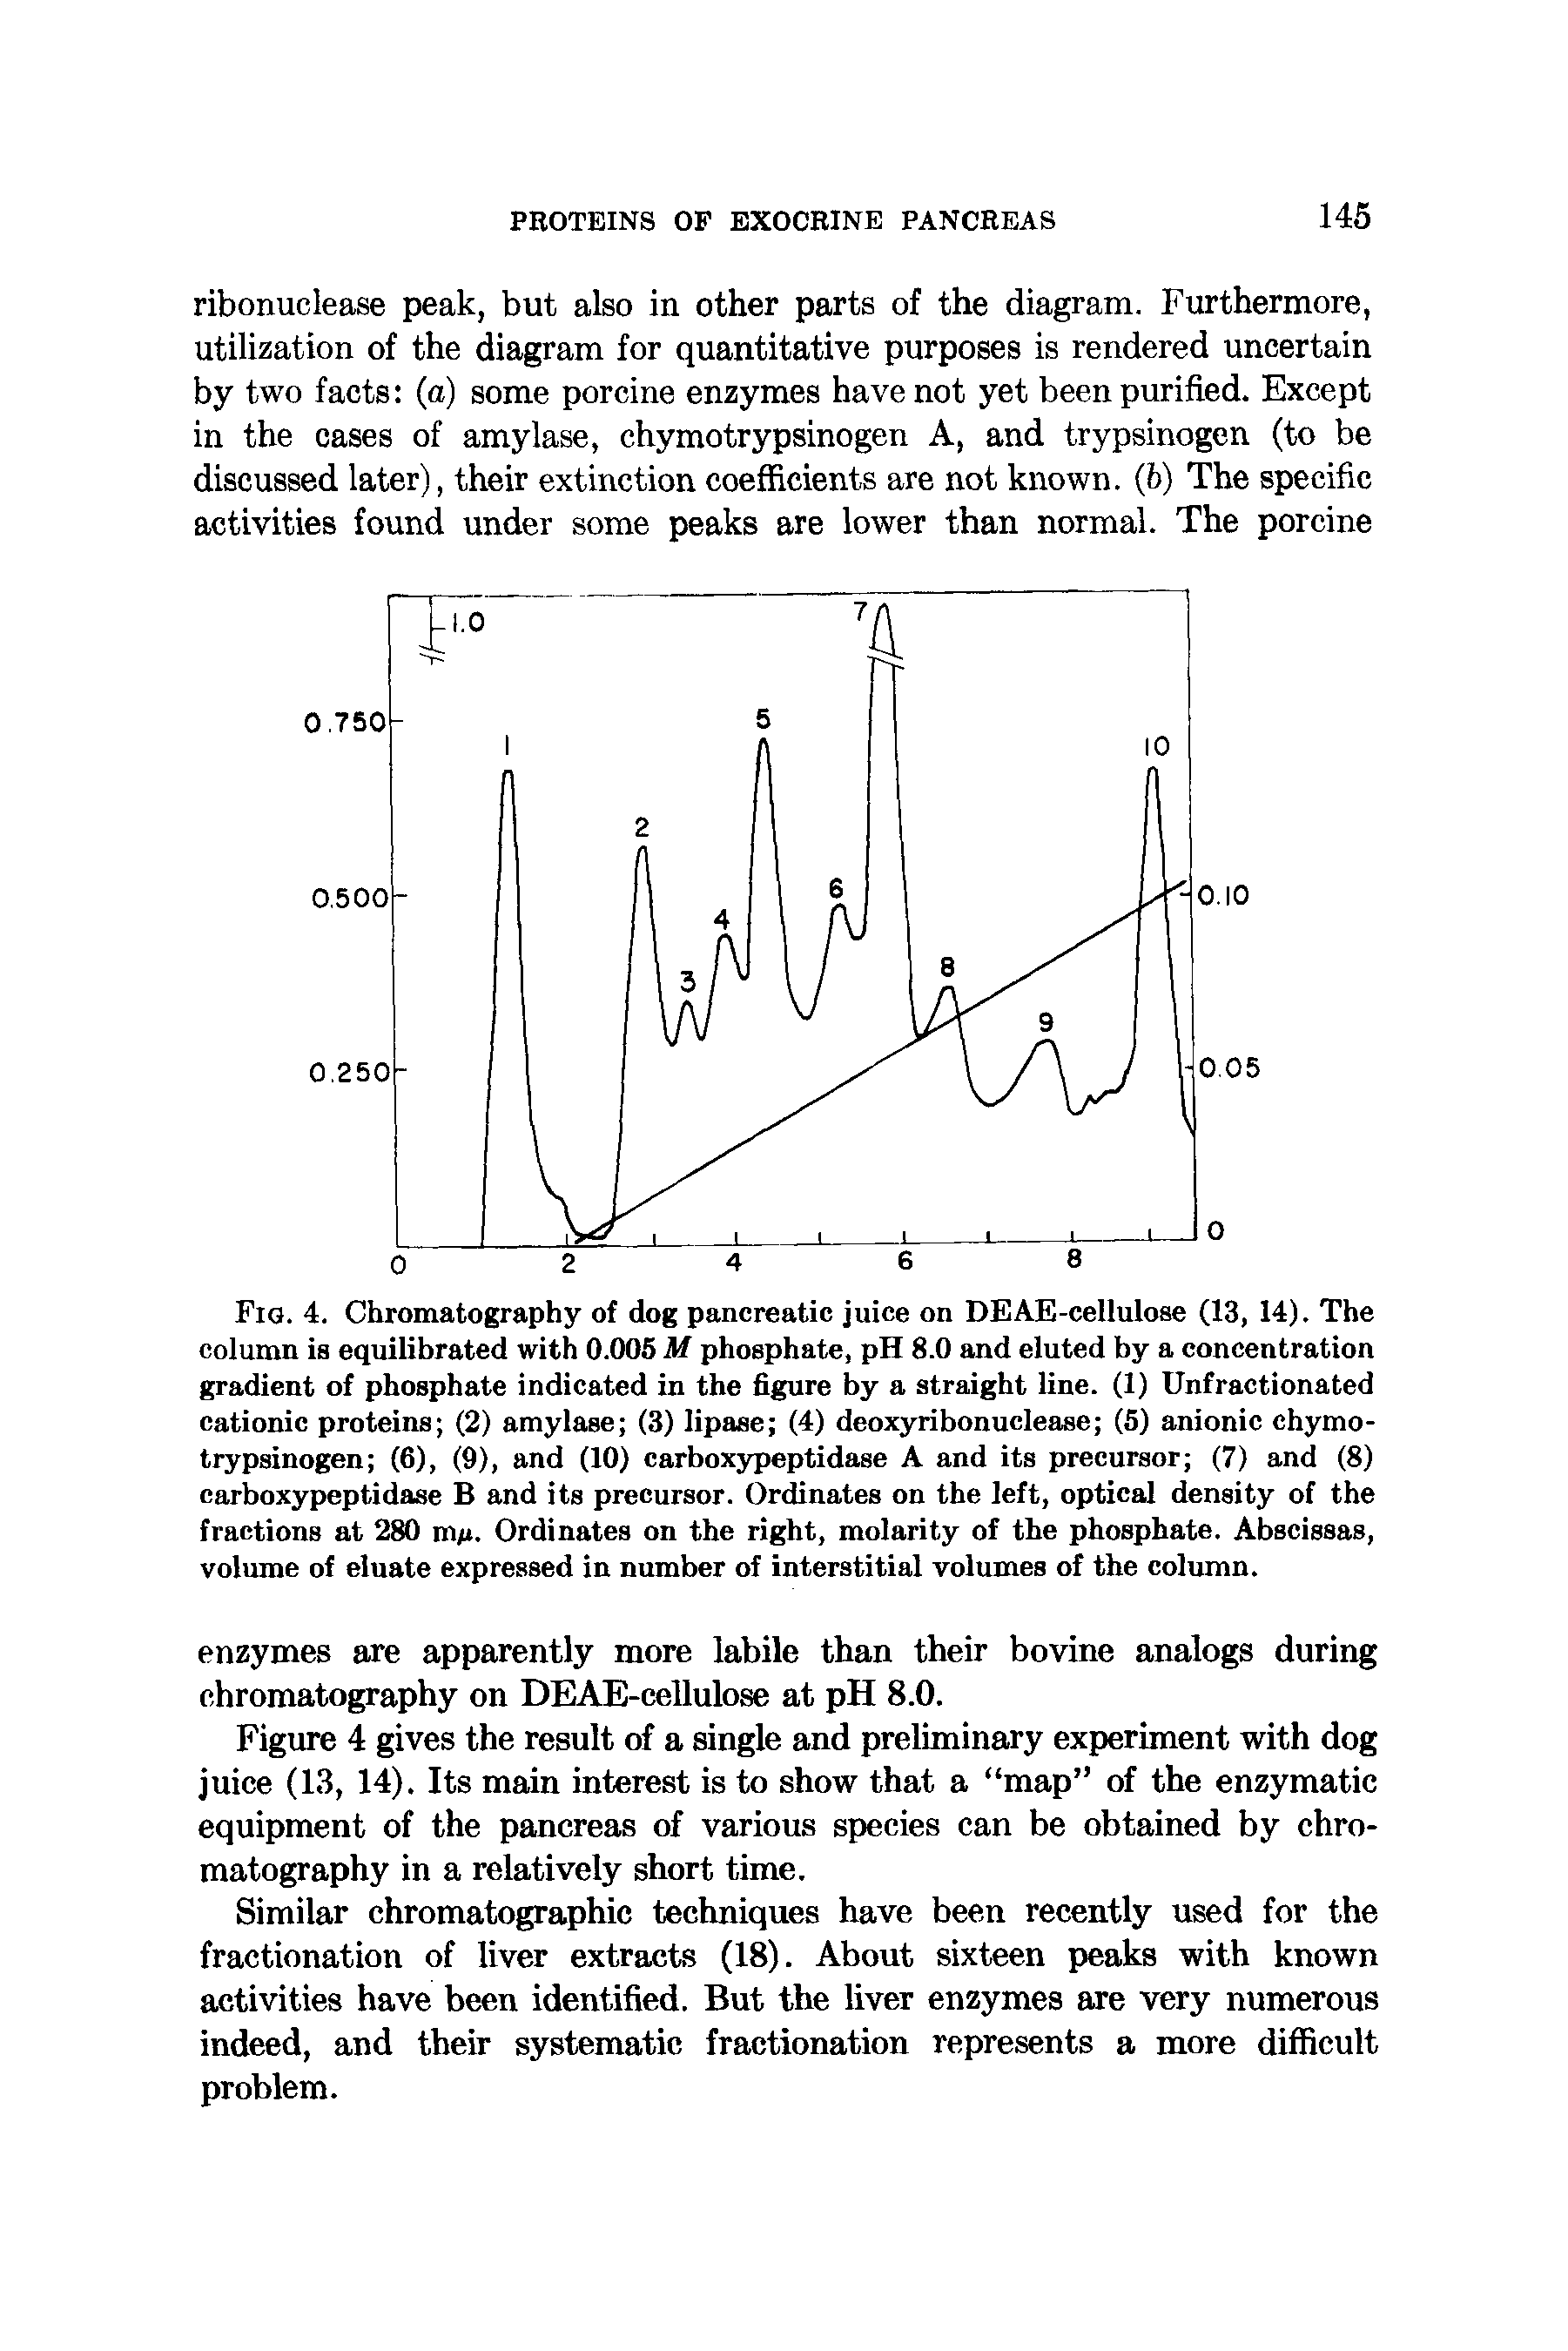 Fig. 4. Chromatography of dog pancreatic juice on DEAE-cellulose (13, 14). The column is equilibrated with 0.005 M phosphate, pH 8.0 and eluted by a concentration gradient of phosphate indicated in the figure by a straight line. (1) Unfractionated cationic proteins (2) amylase (3) lipase (4) deoxyribonuclease (5) anionic chymotrypsinogen (6), (9), and (10) carboxypeptidase A and its precursor (7) and (8) carboxypeptidase B and its precursor. Ordinates on the left, optical density of the fractions at 280 m/ . Ordinates on the right, molarity of the phosphate. Abscissas, volume of eluate expressed in number of interstitial volumes of the column.